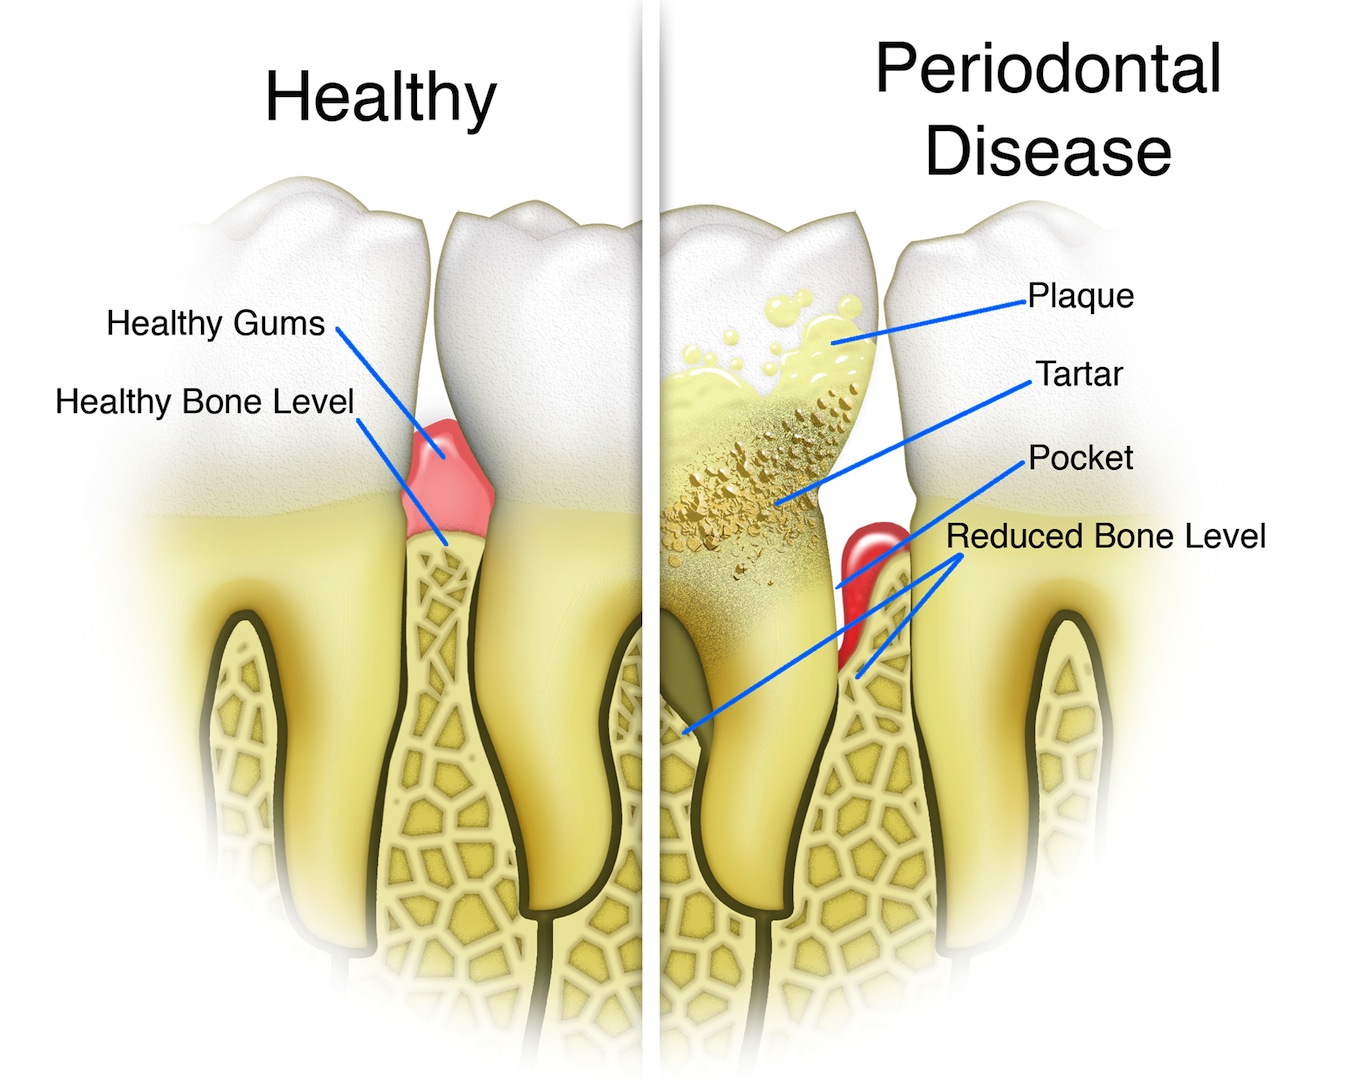 Gum disease can lead to bone loss and eventual tooth loss.